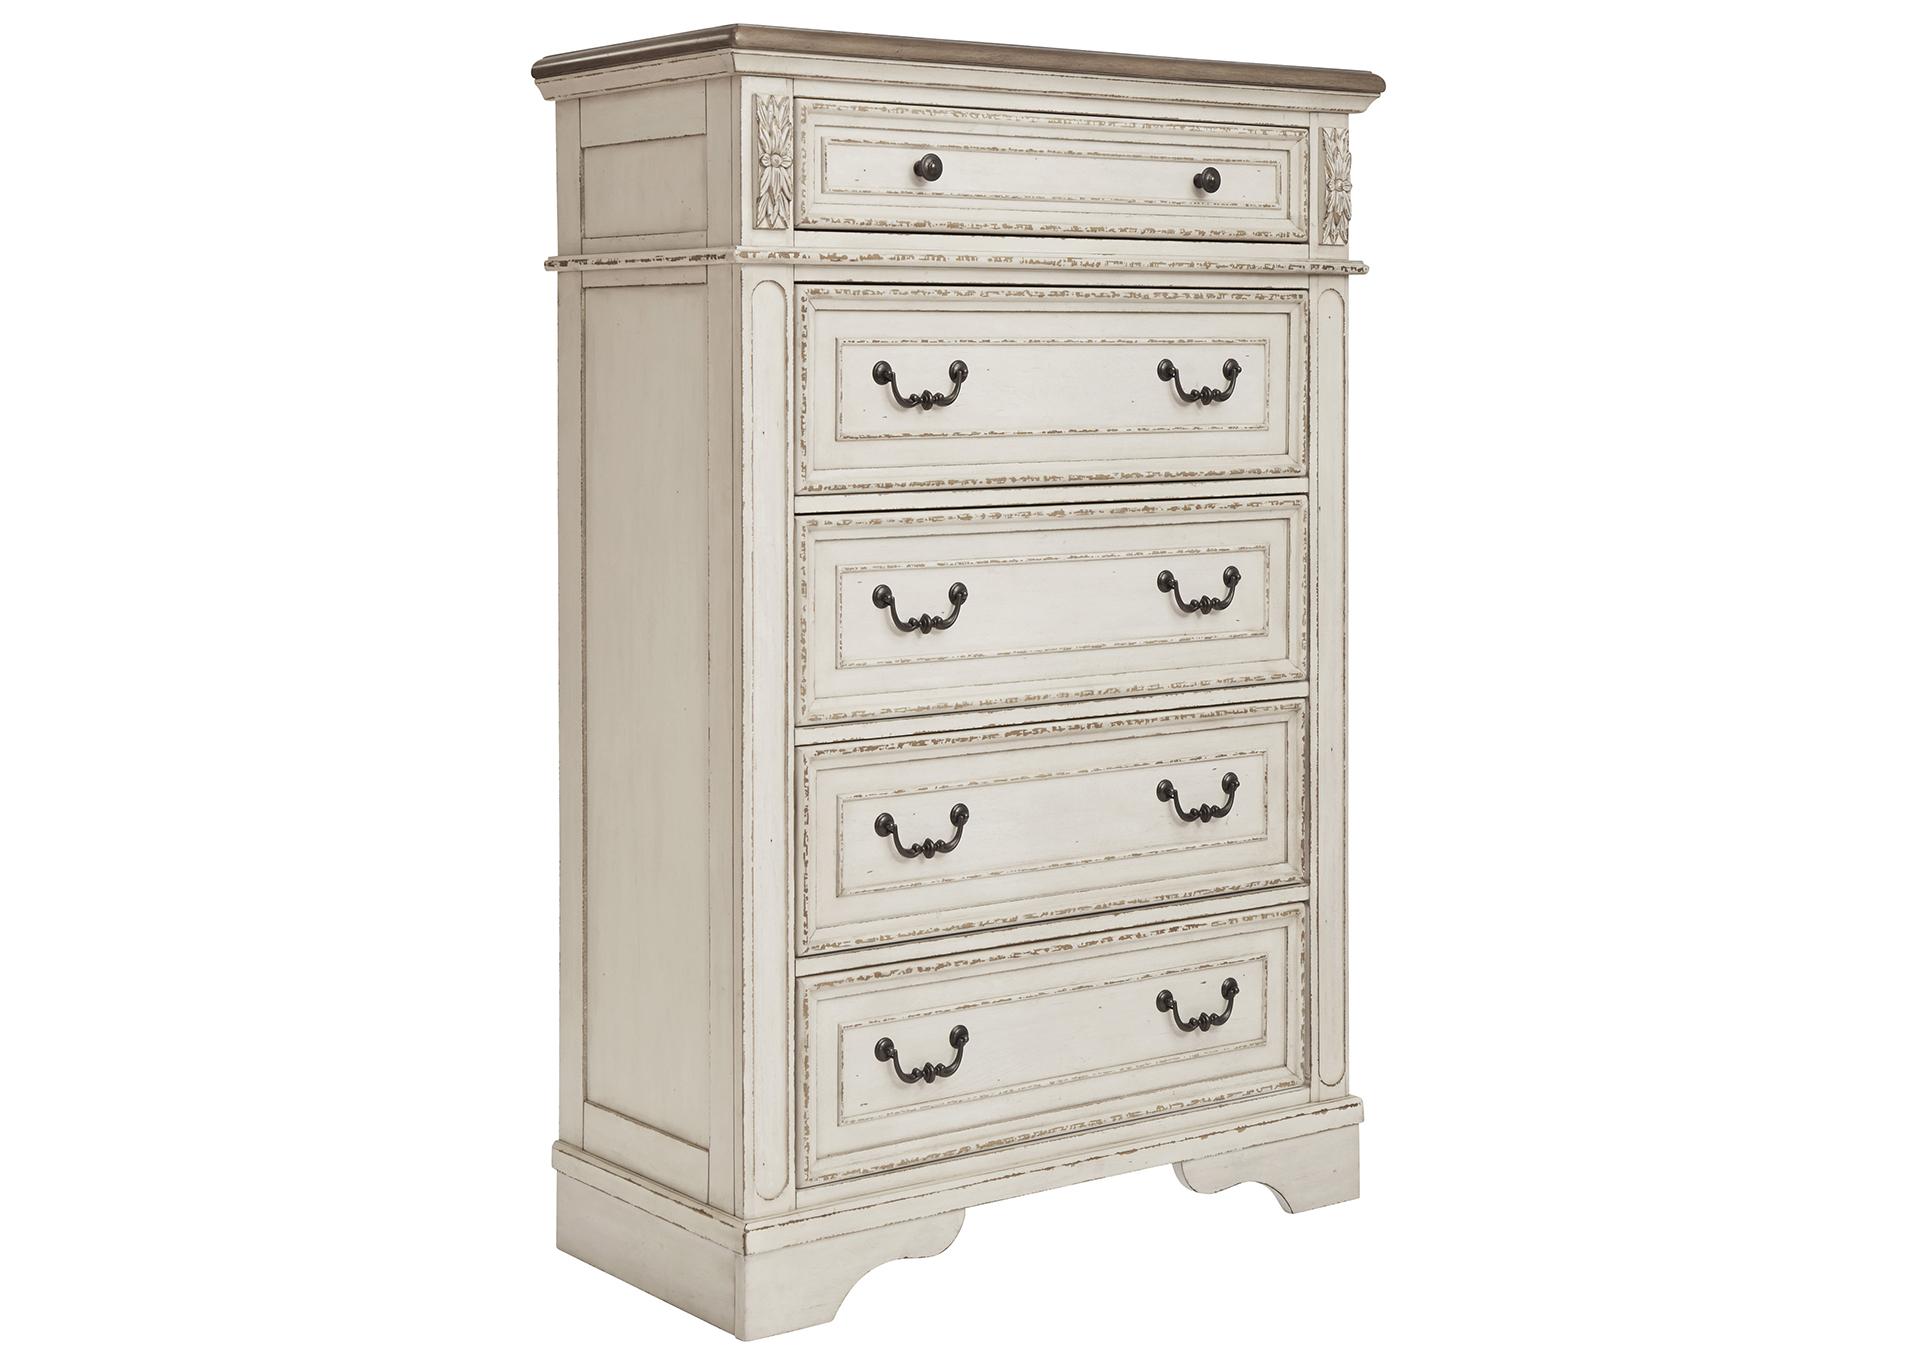 REALYN FIVE DRAWER CHEST,ASHLEY FURNITURE INC.